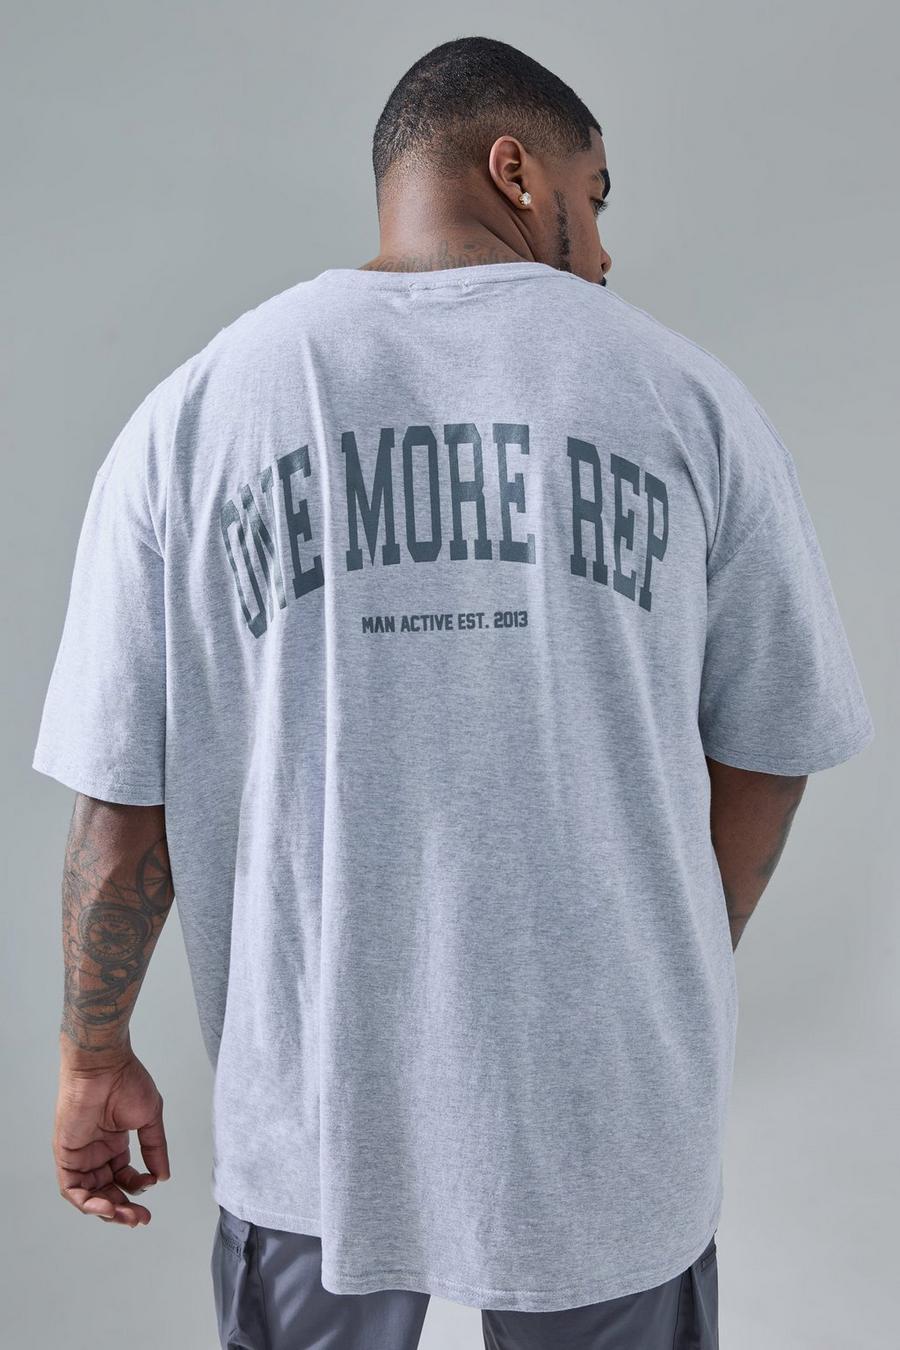 T-shirt Plus Size oversize Man Active One More Rep, Grey marl